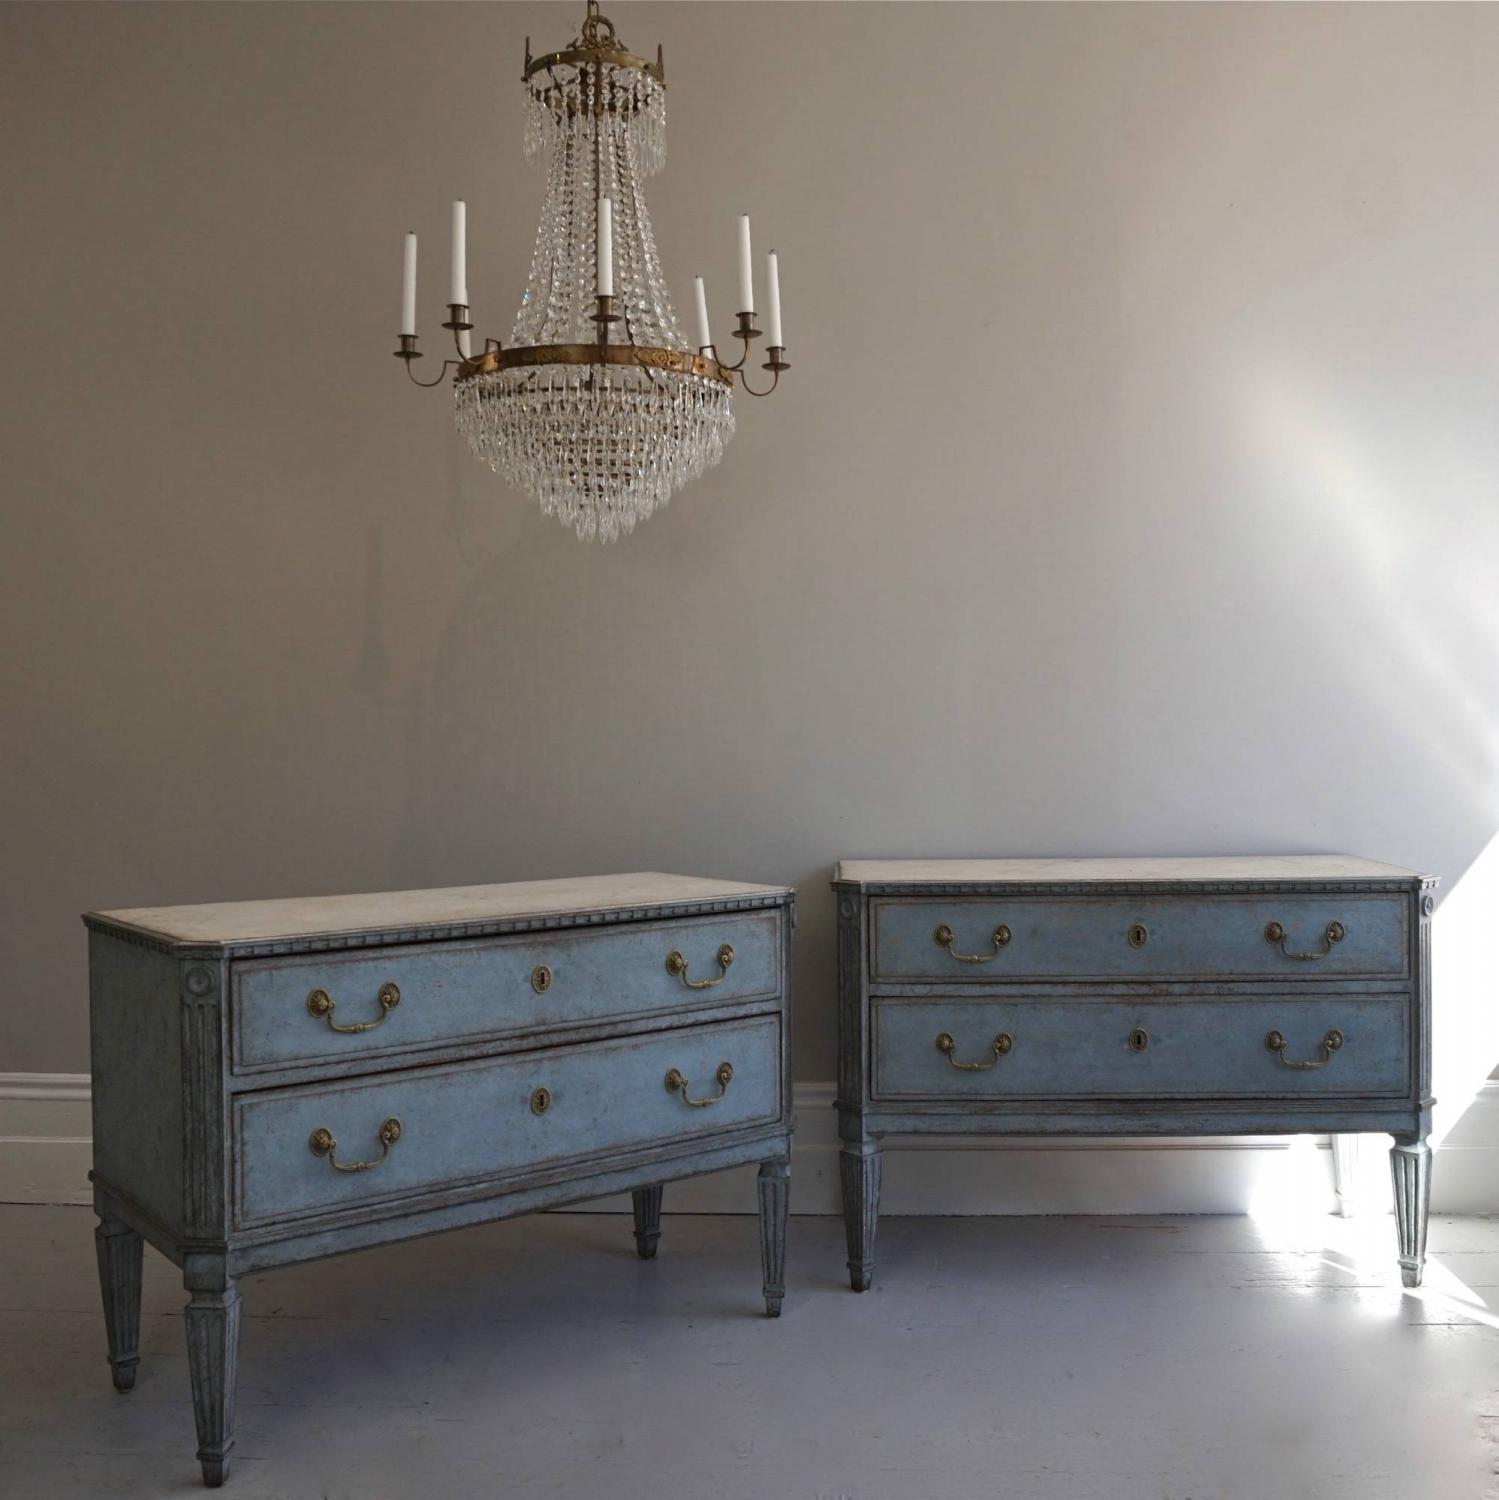 PAIR OF DECORATIVE SWEDISH GUSTAVIAN STYLE CHESTS